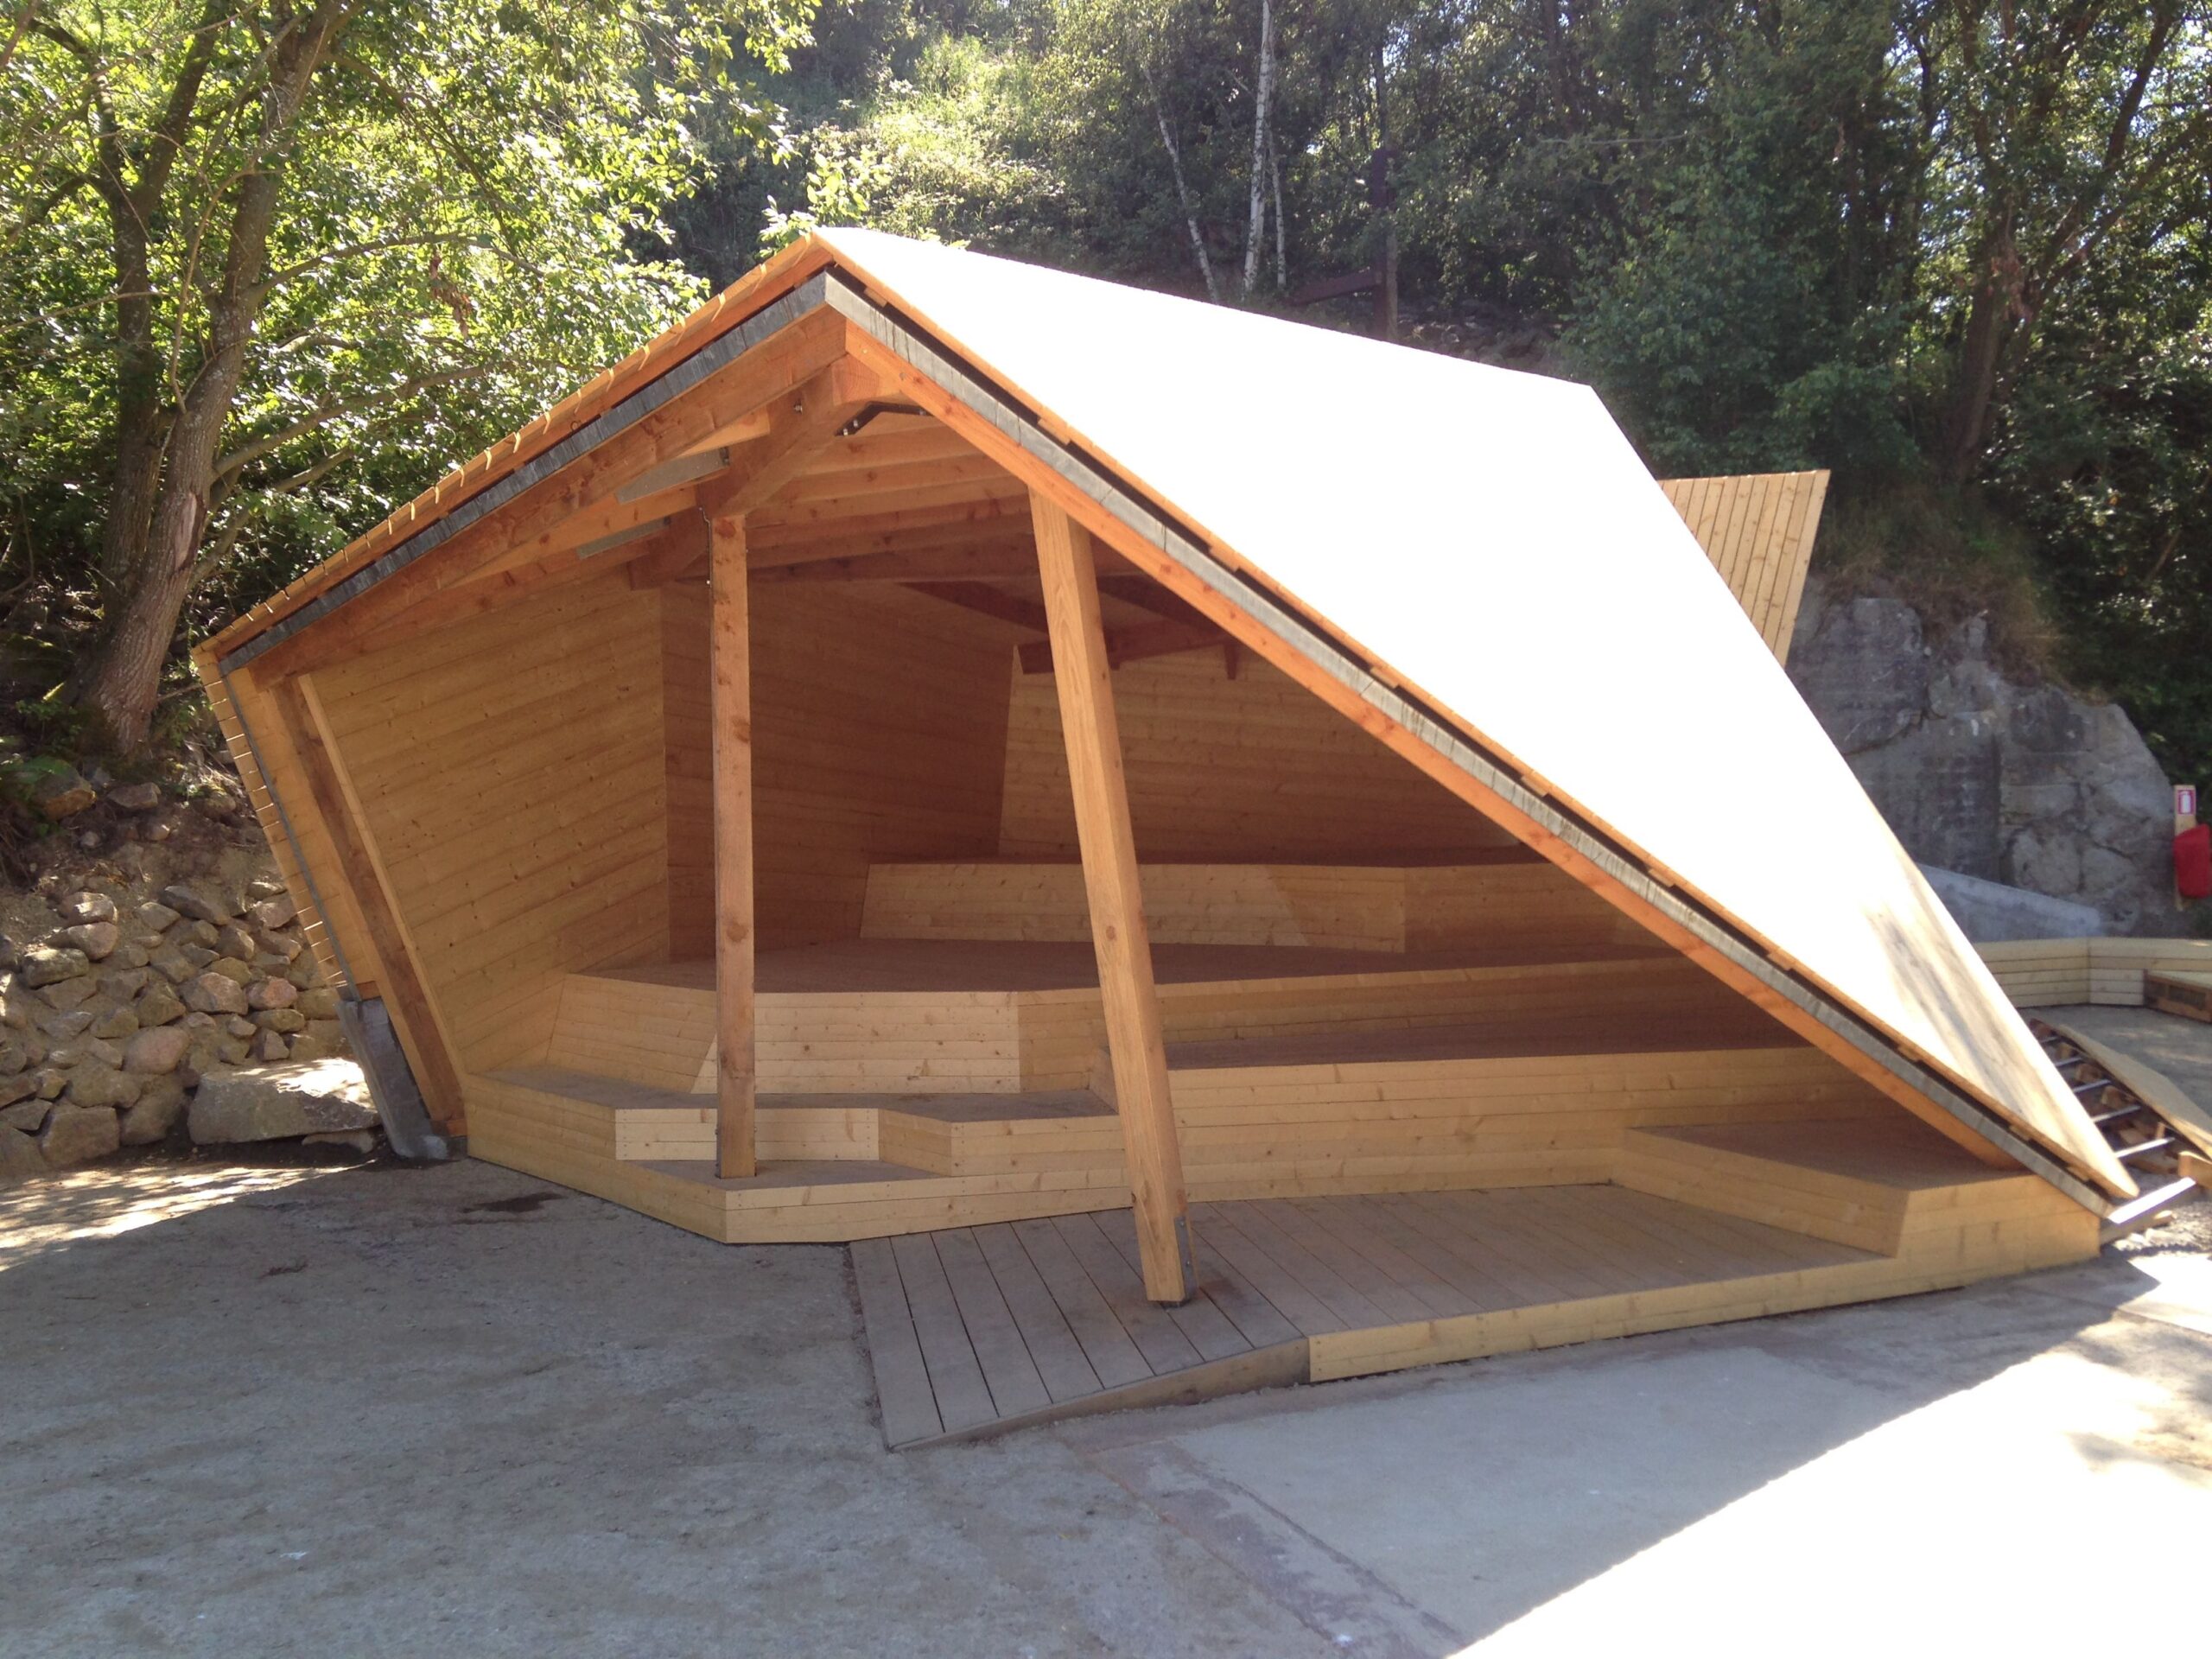 The Importance of Outdoor Shelters for Protection and Comfort